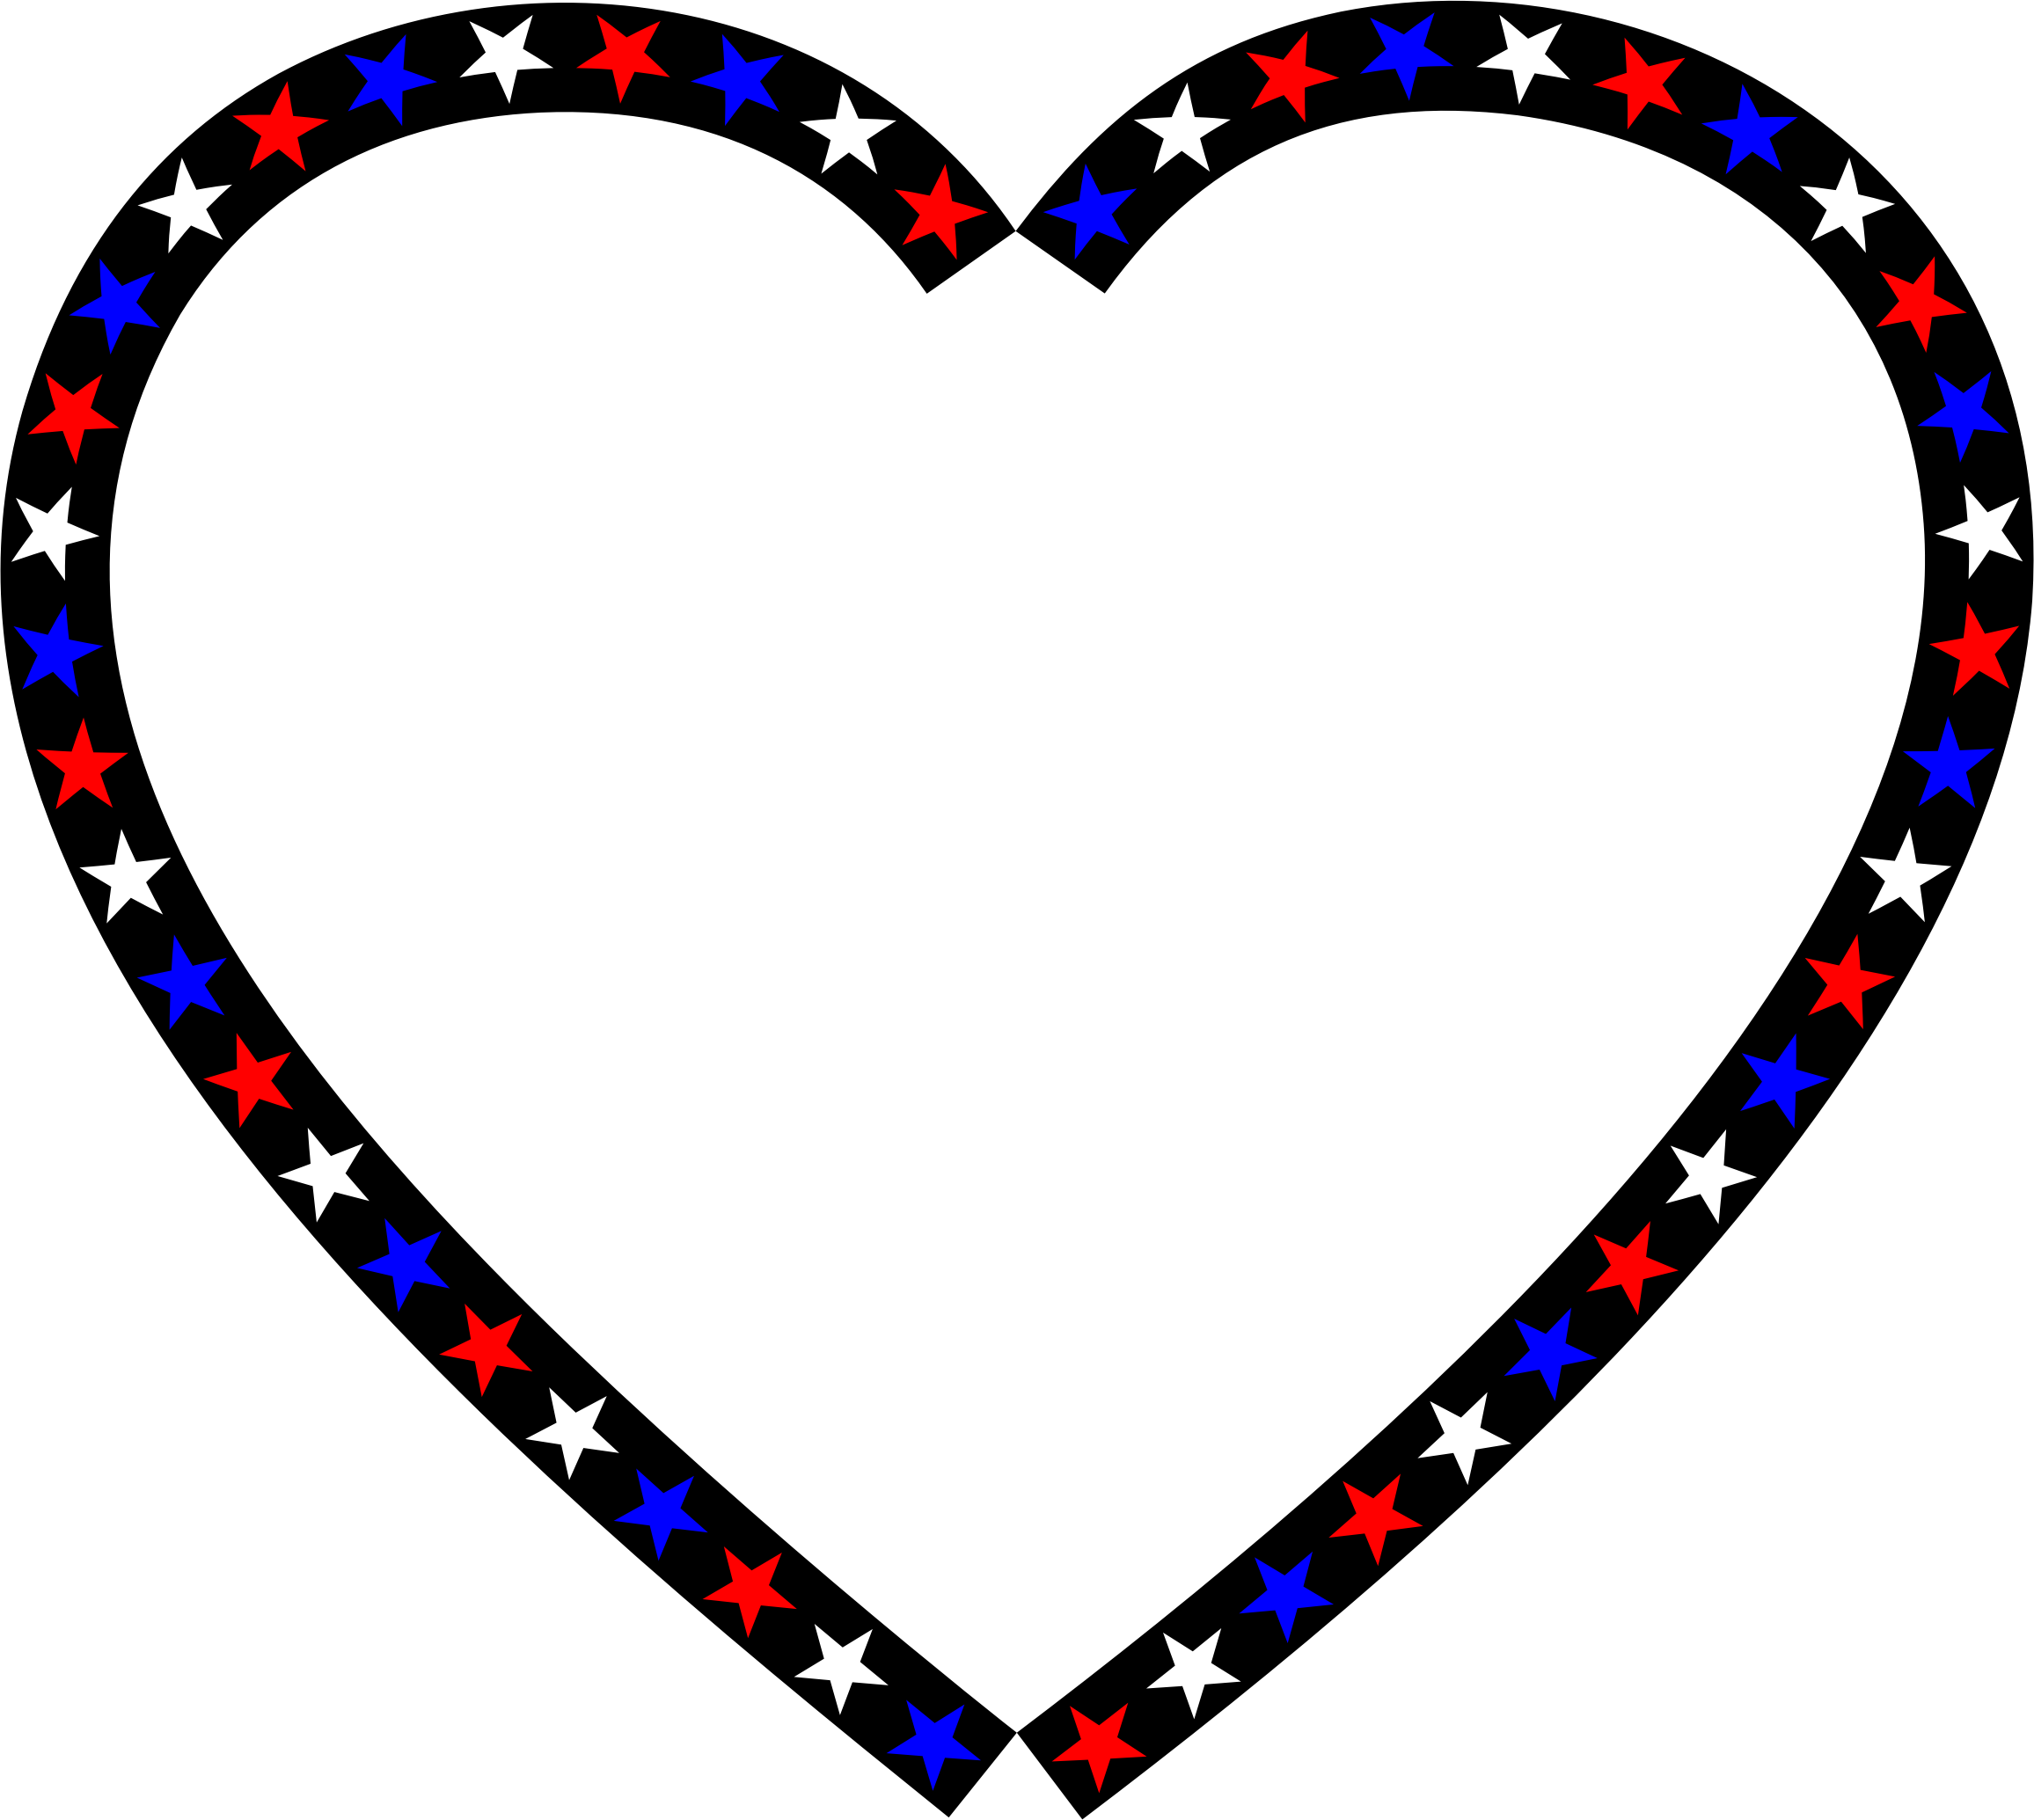 Big Image - Red White Blue Heart (2312x2069)